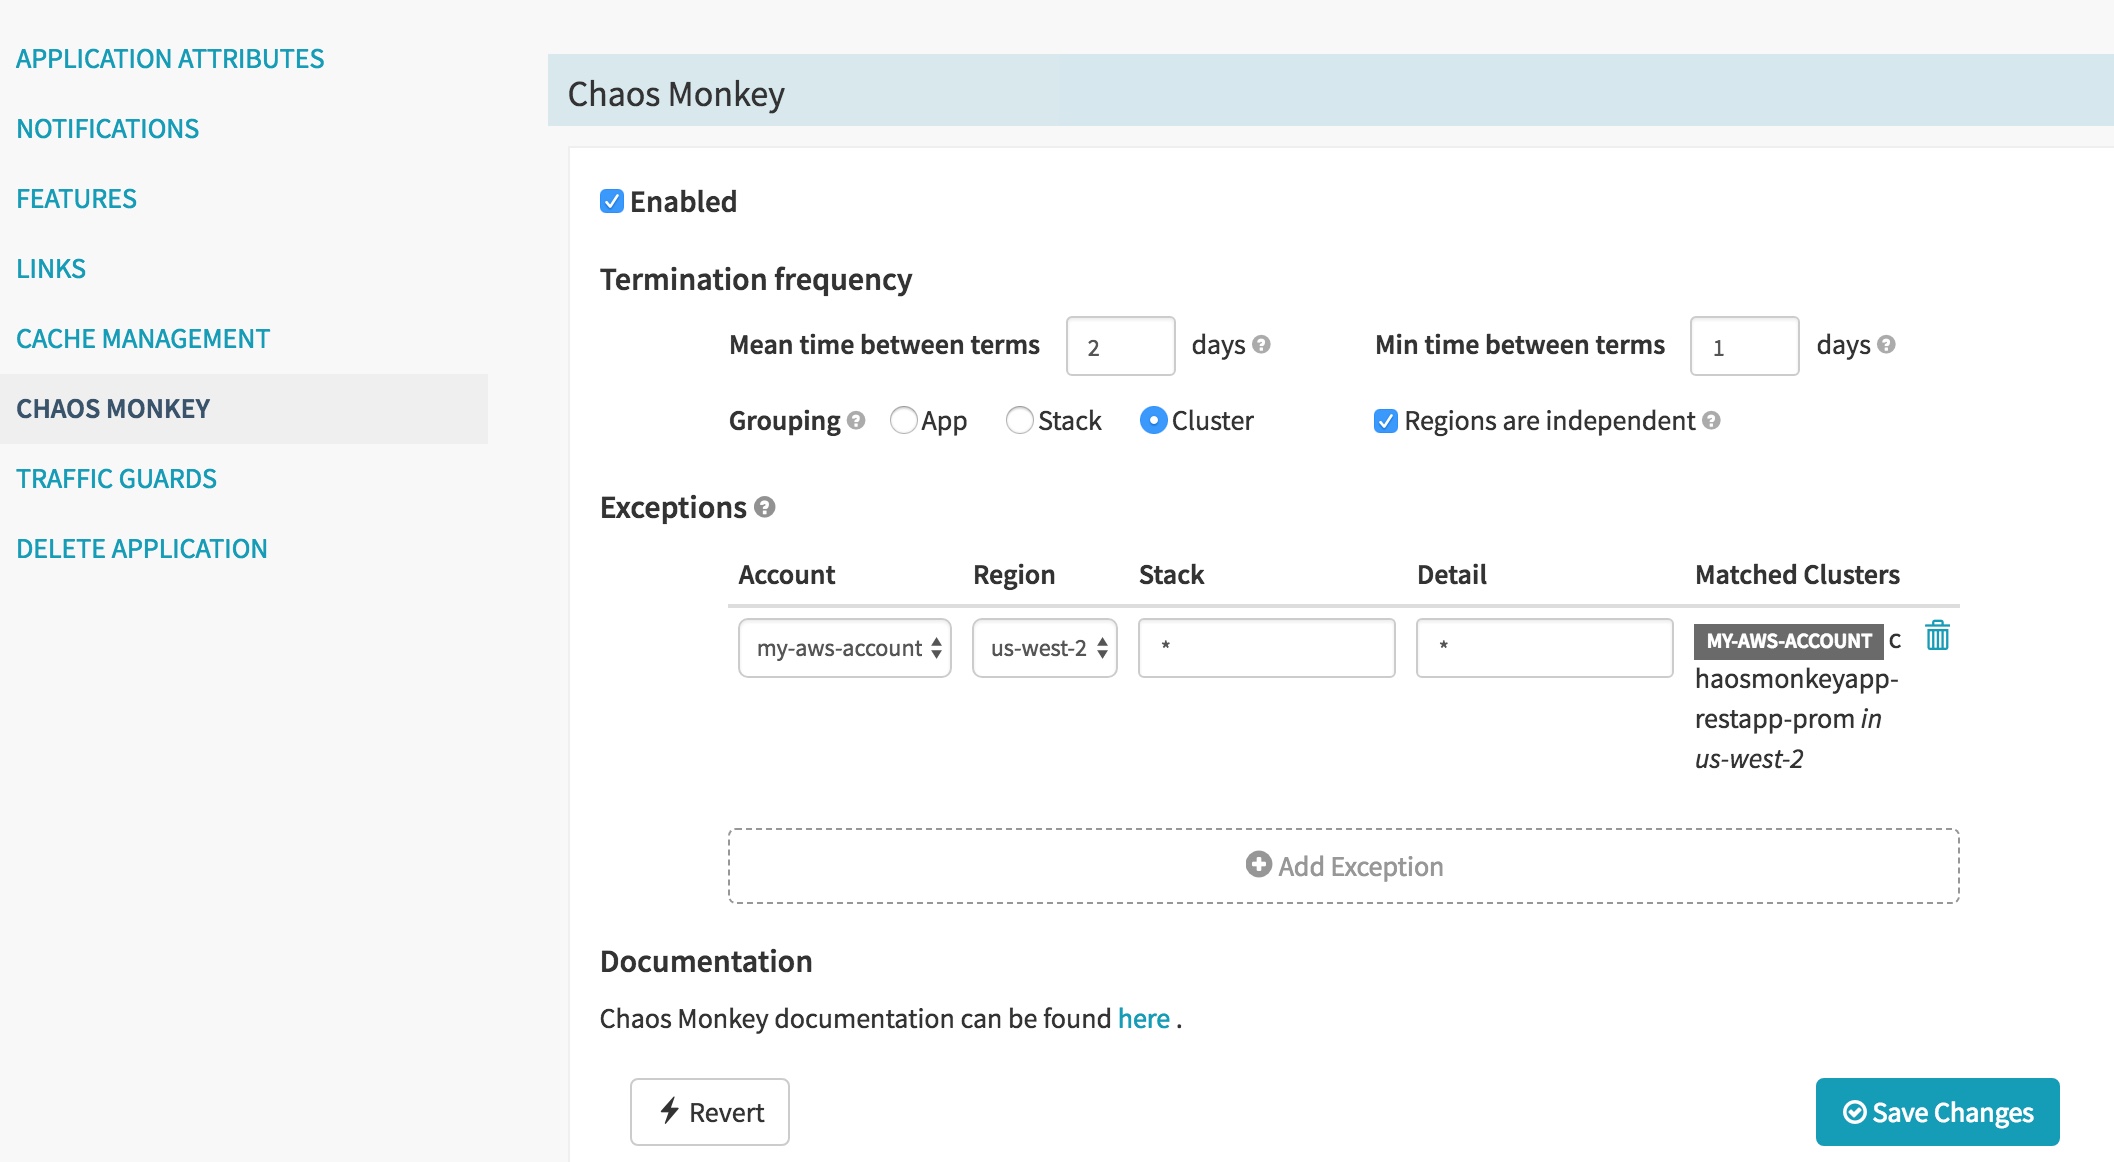 Configuring Chaos Monkey for an Application